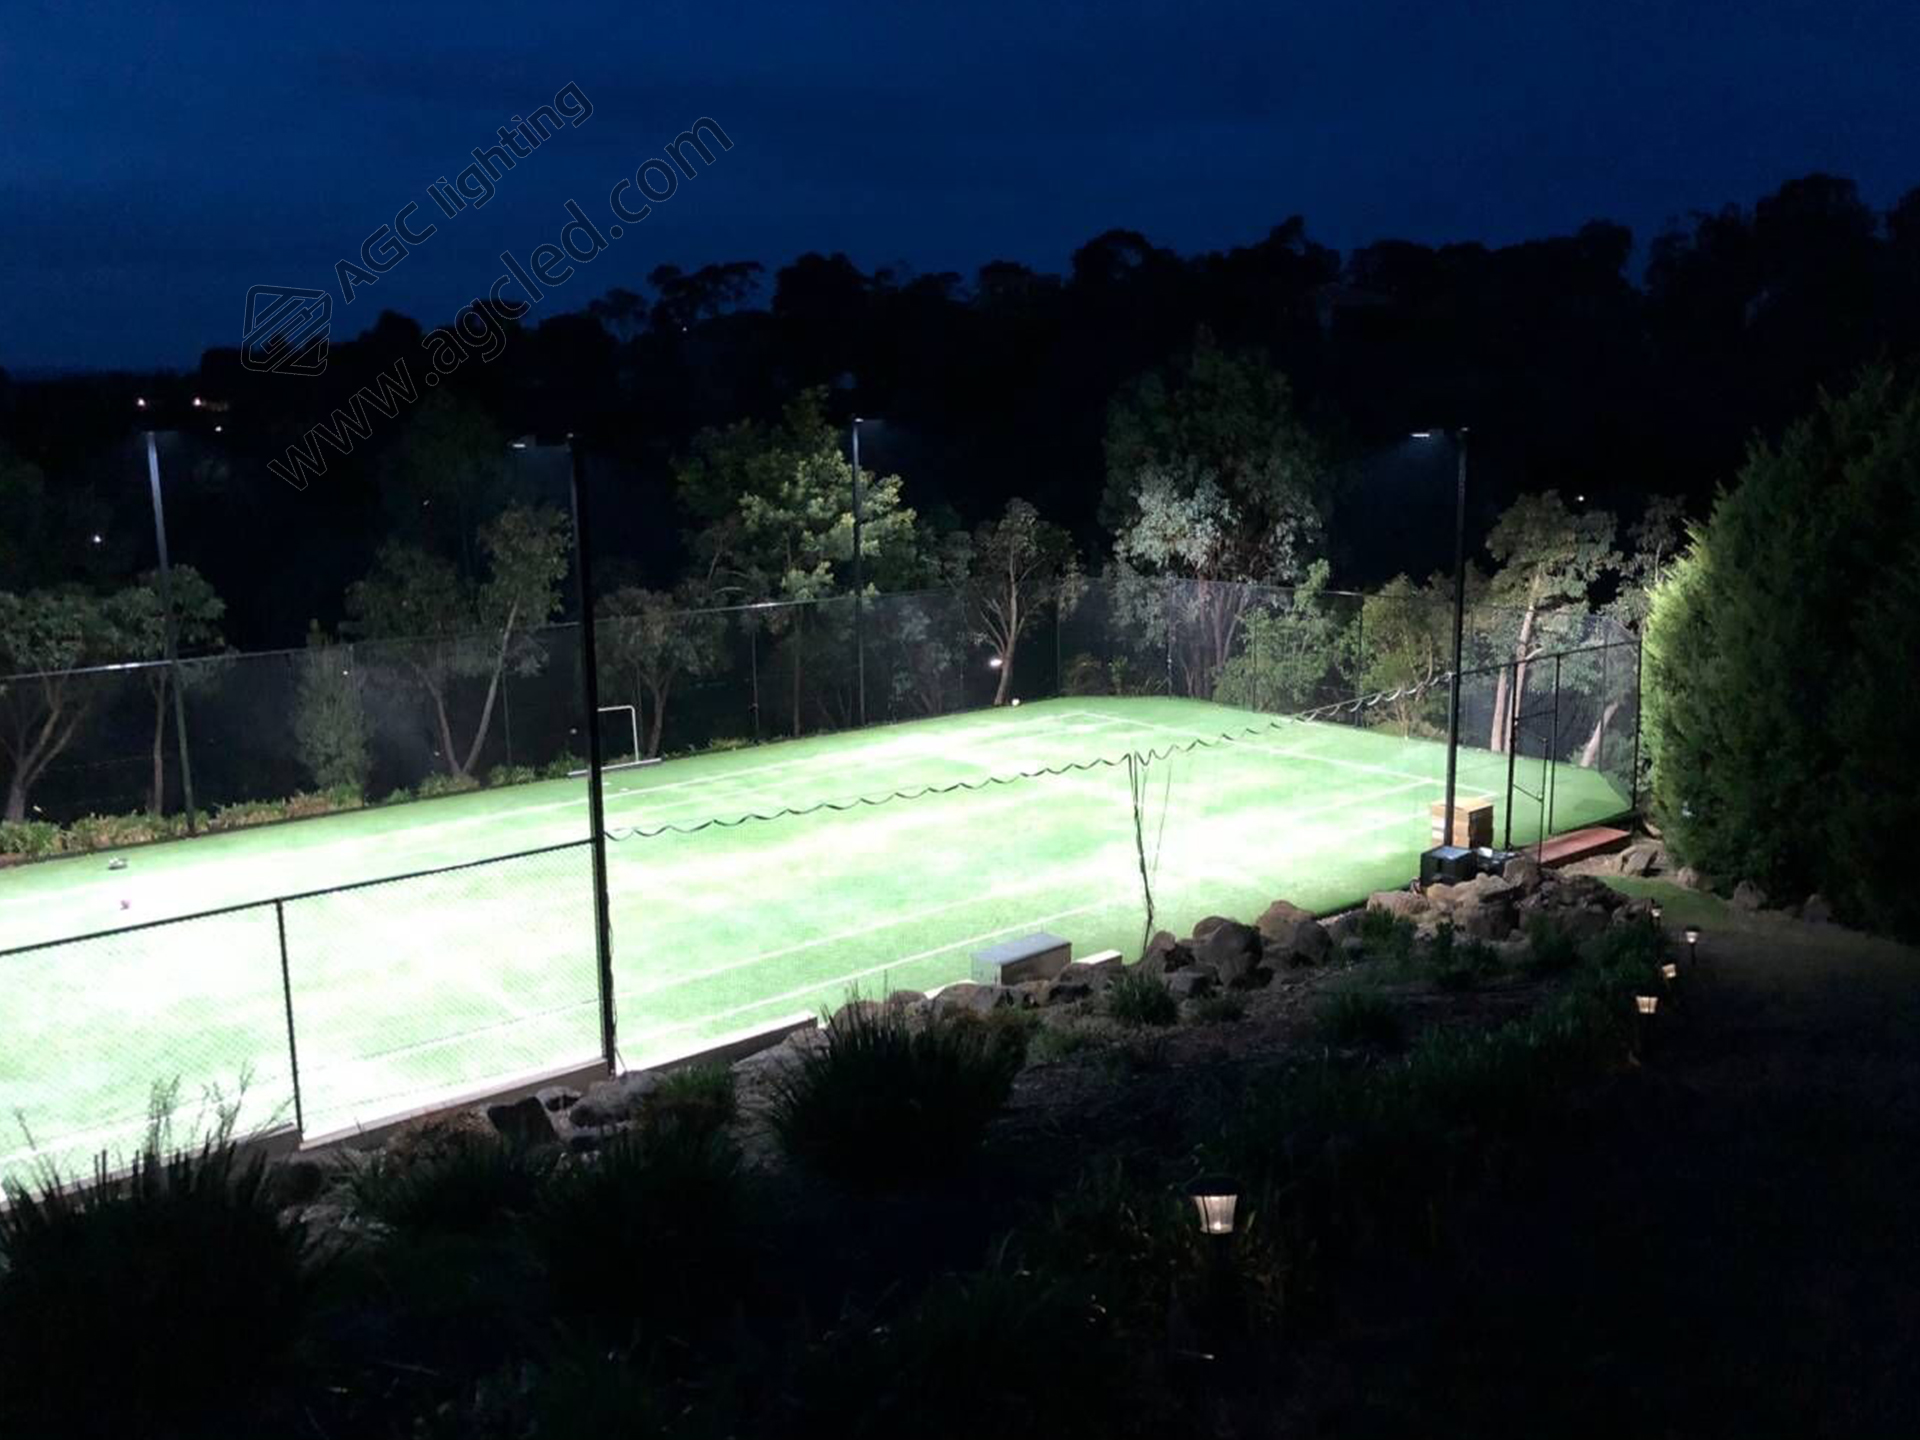 450W LED Replace 1500w HID in Tennis Court